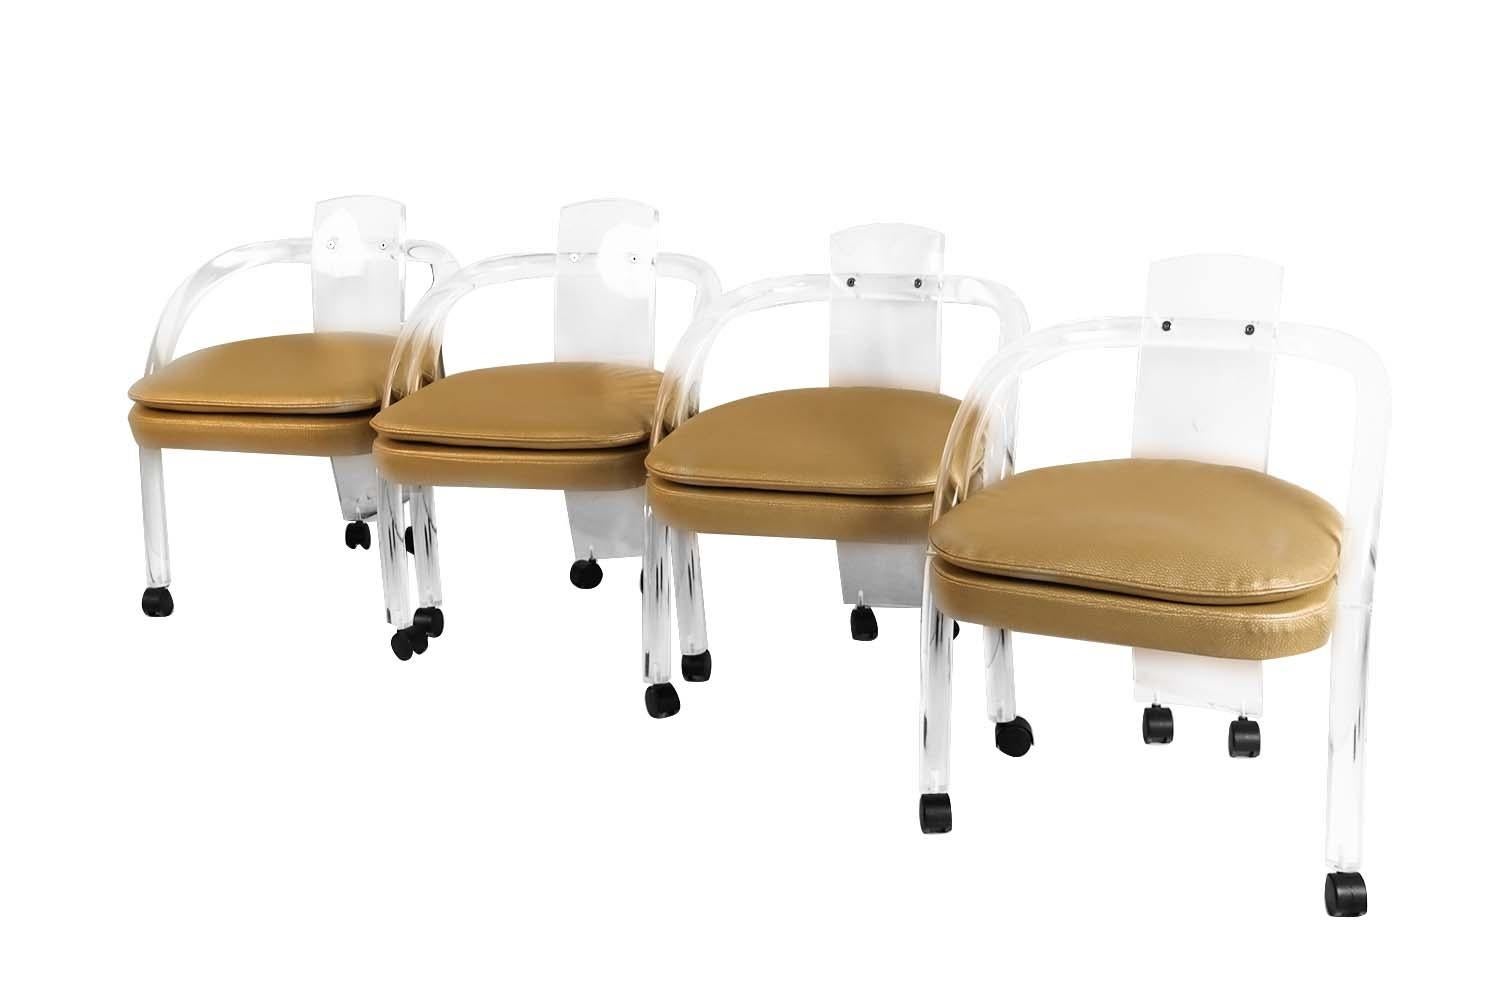 An amazing set of 4 vintage Mid-Century Modern tubular Lucite chairs, in the style of Charles Hollis Jones. Great modern form, featuring a tubular Lucite frame with a barrel backrest. Detailed raised soft padded, seat cushions, in original neutral